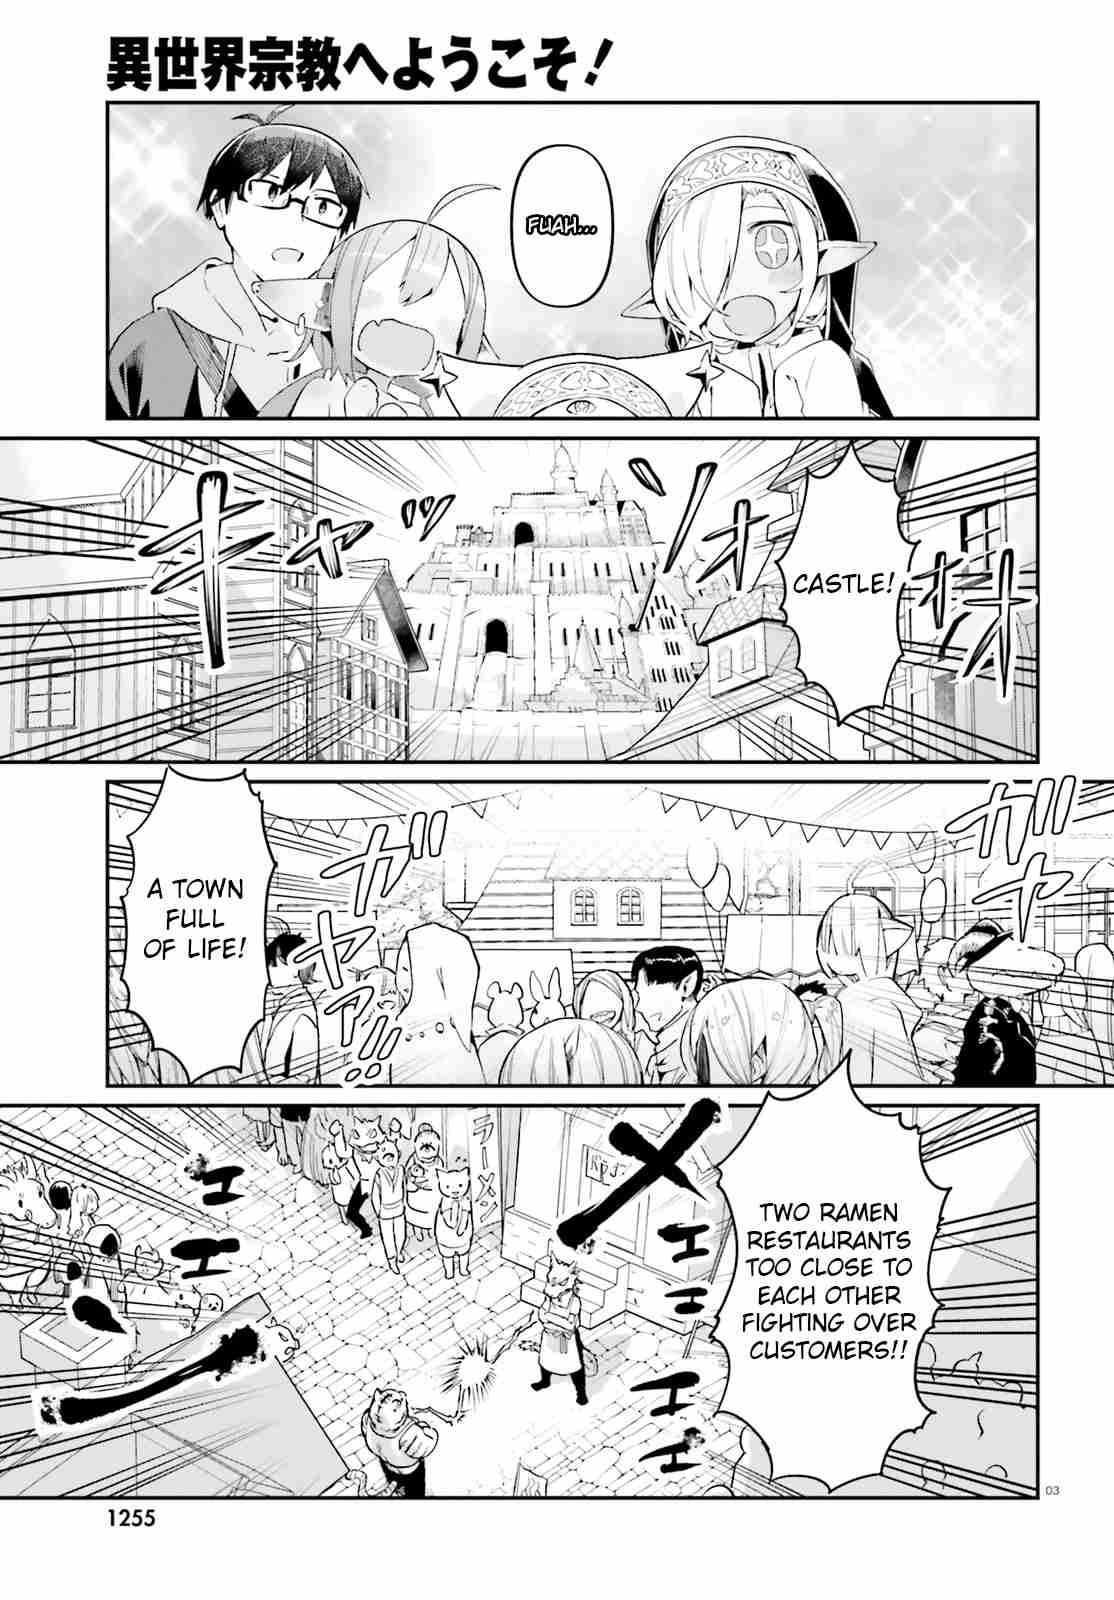 Welcome To Religion In Another World! Vol. 2 Ch. 13 Welcome to the best start